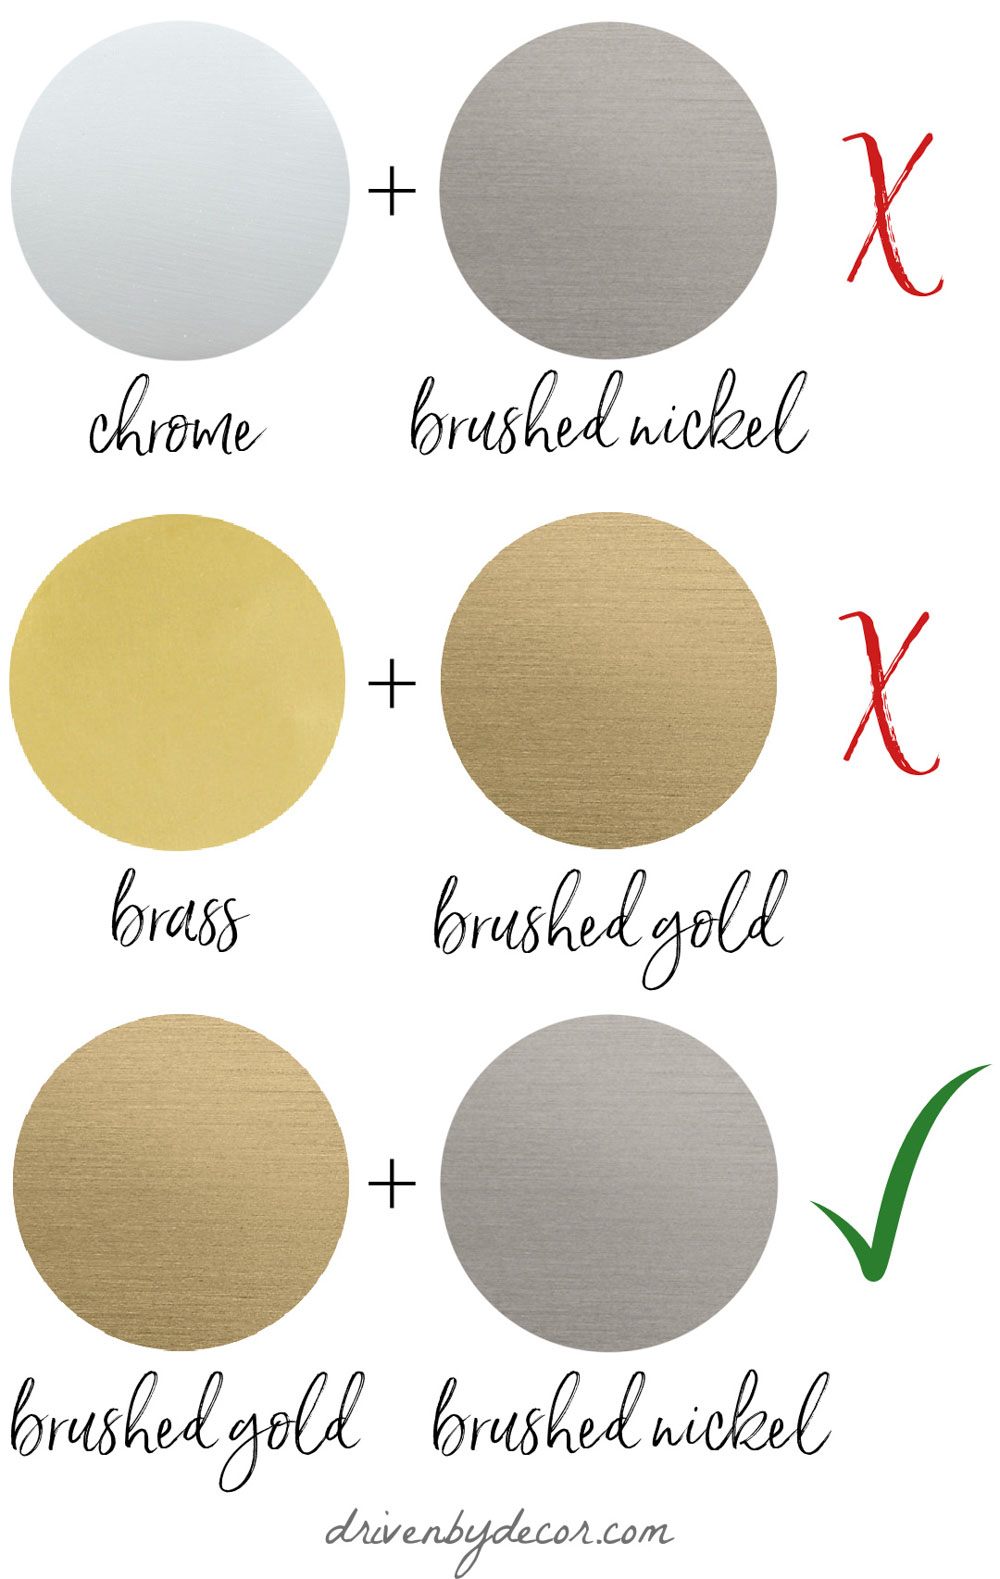 We're All About That Brass: A Guide to Brass Finishes